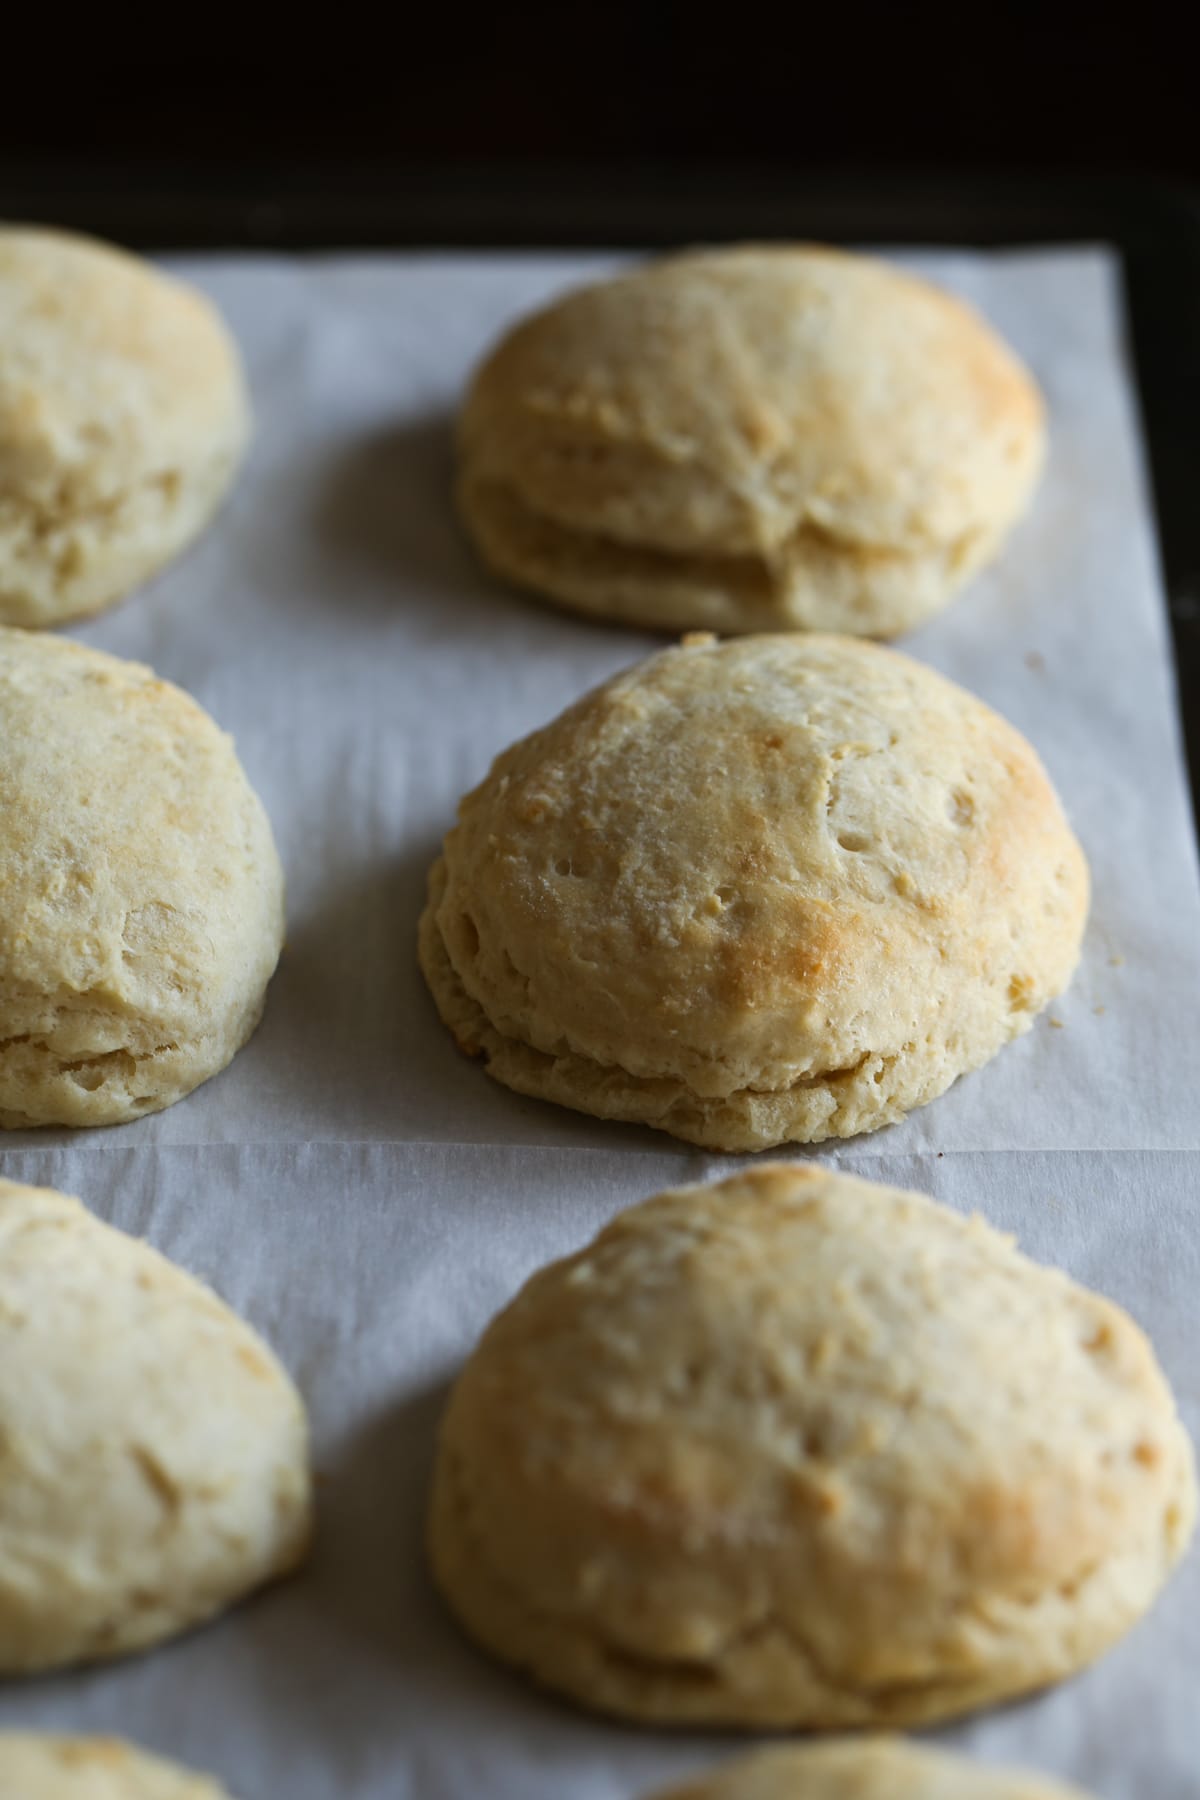 Biscuits right out of the oven on a parchment lined baking sheet